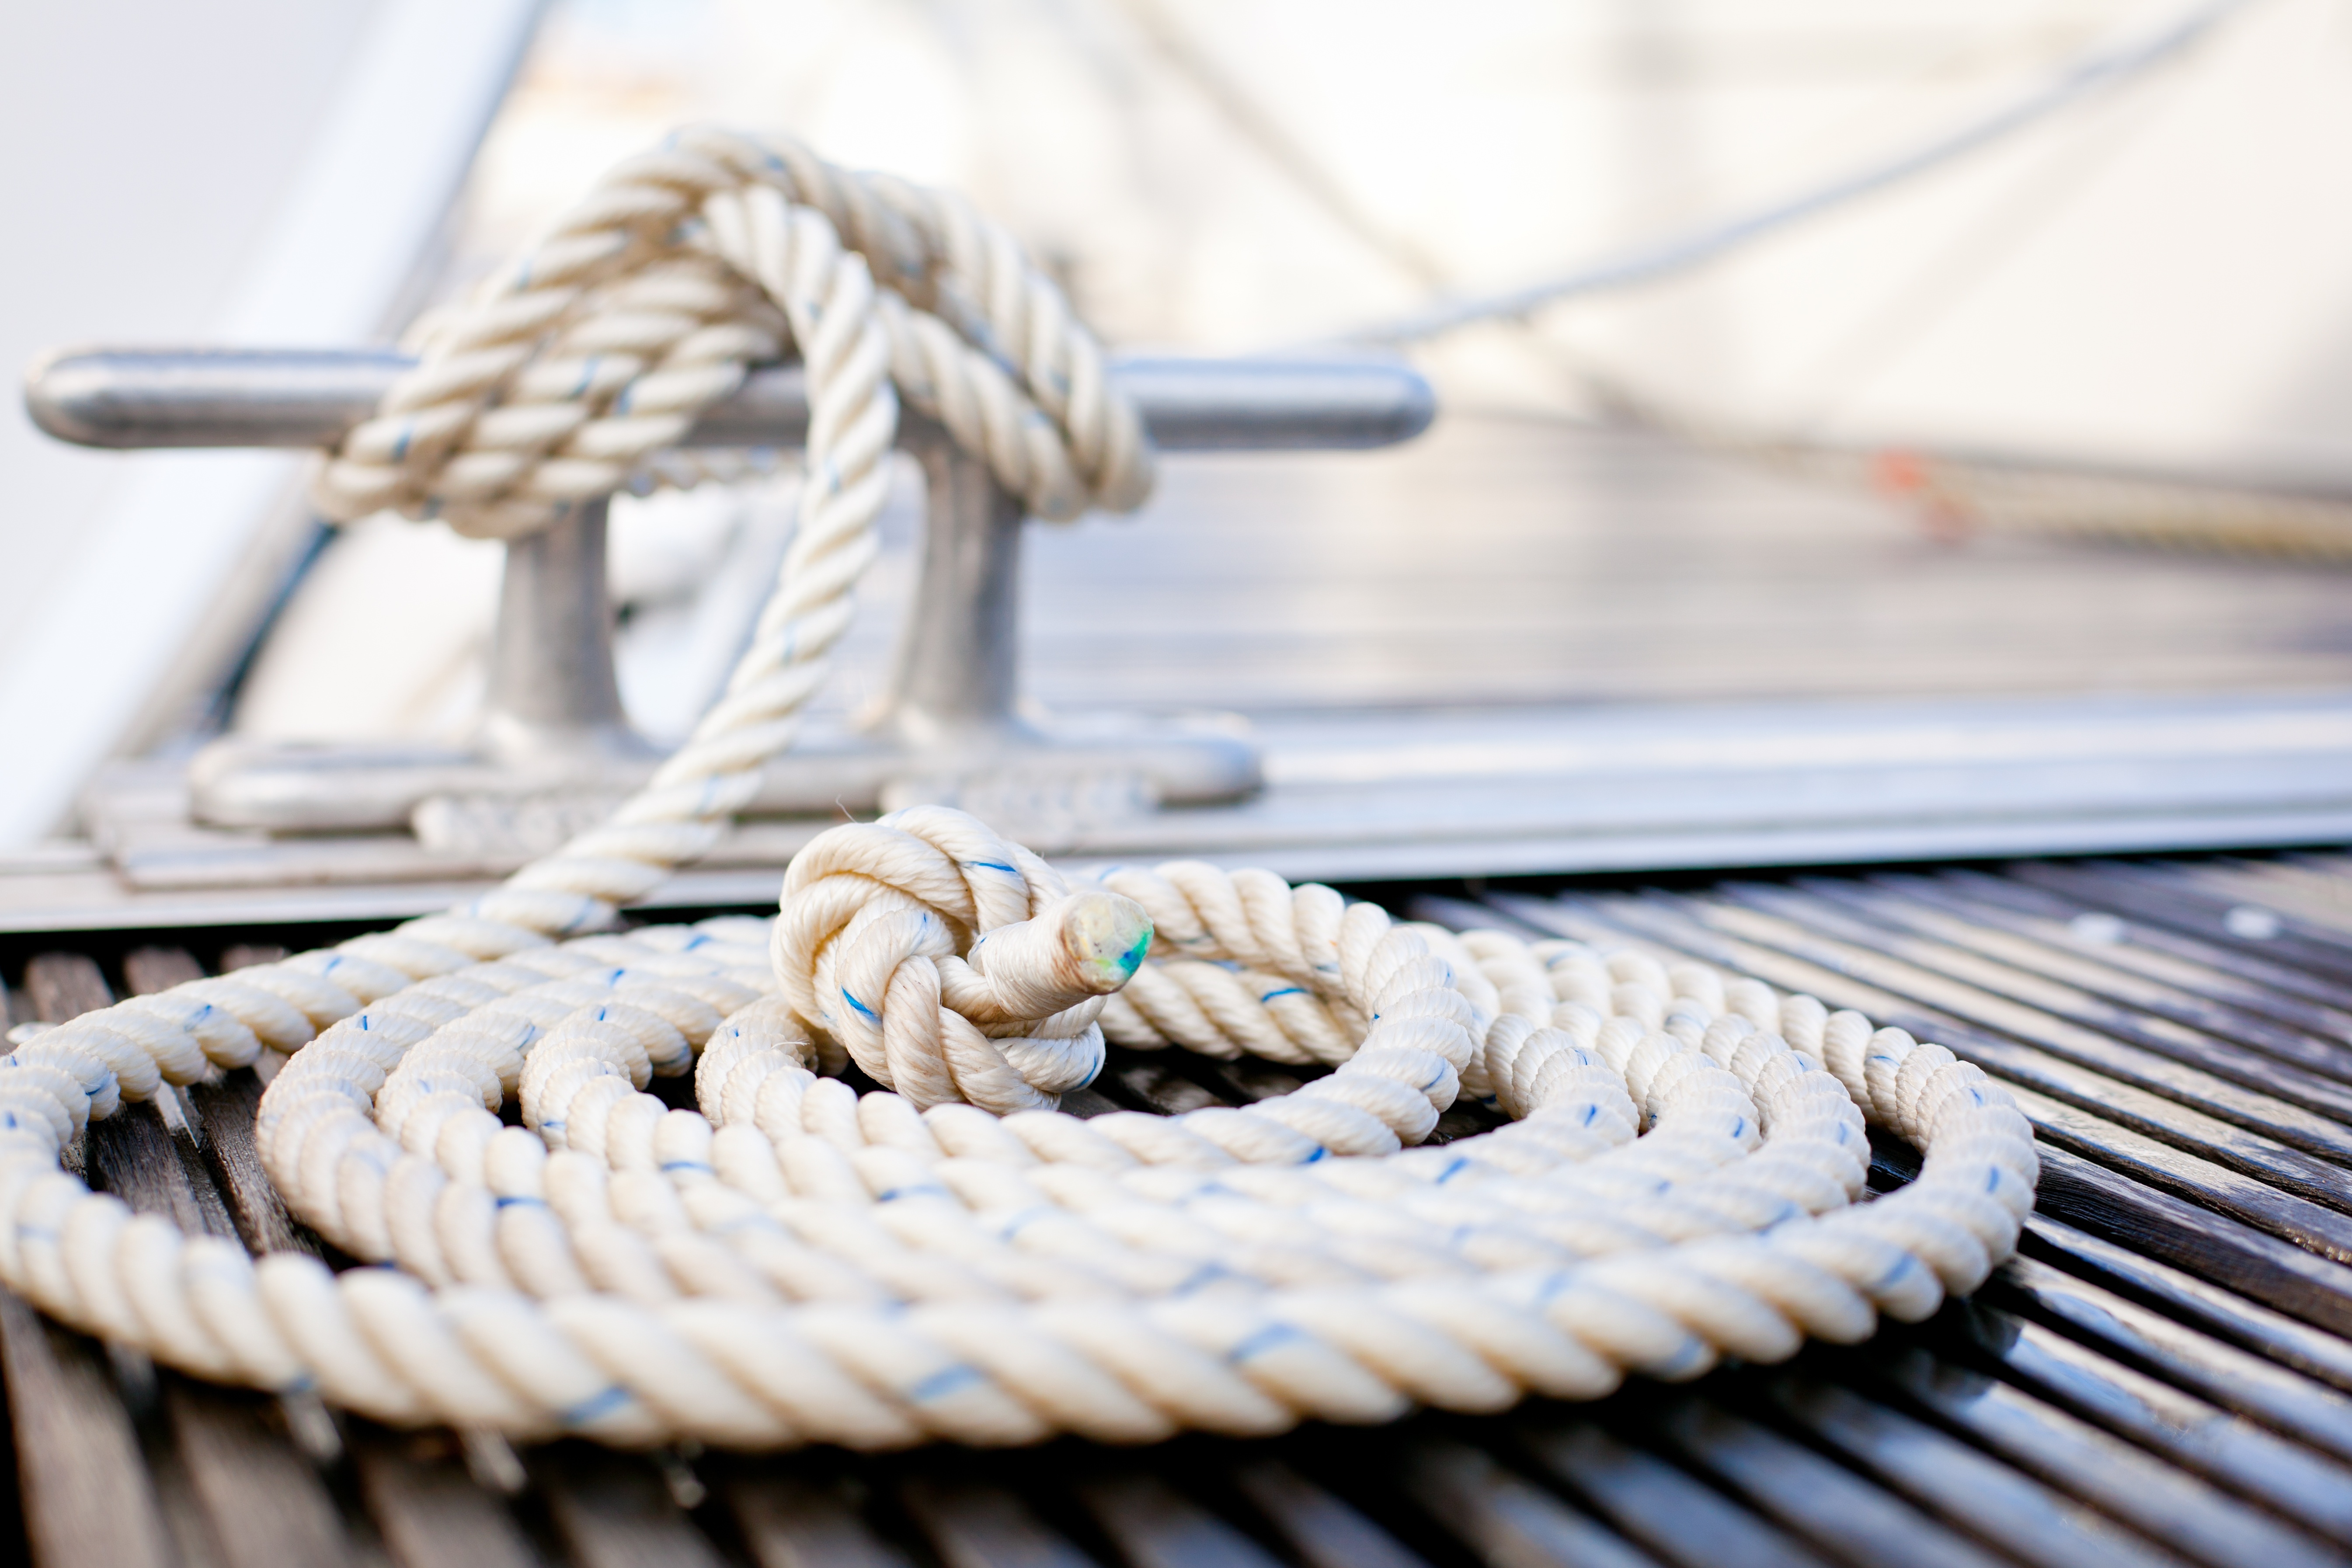 10445594 - close-up of mooring rope with a knotted end tied around a cleat on a wooden pier.